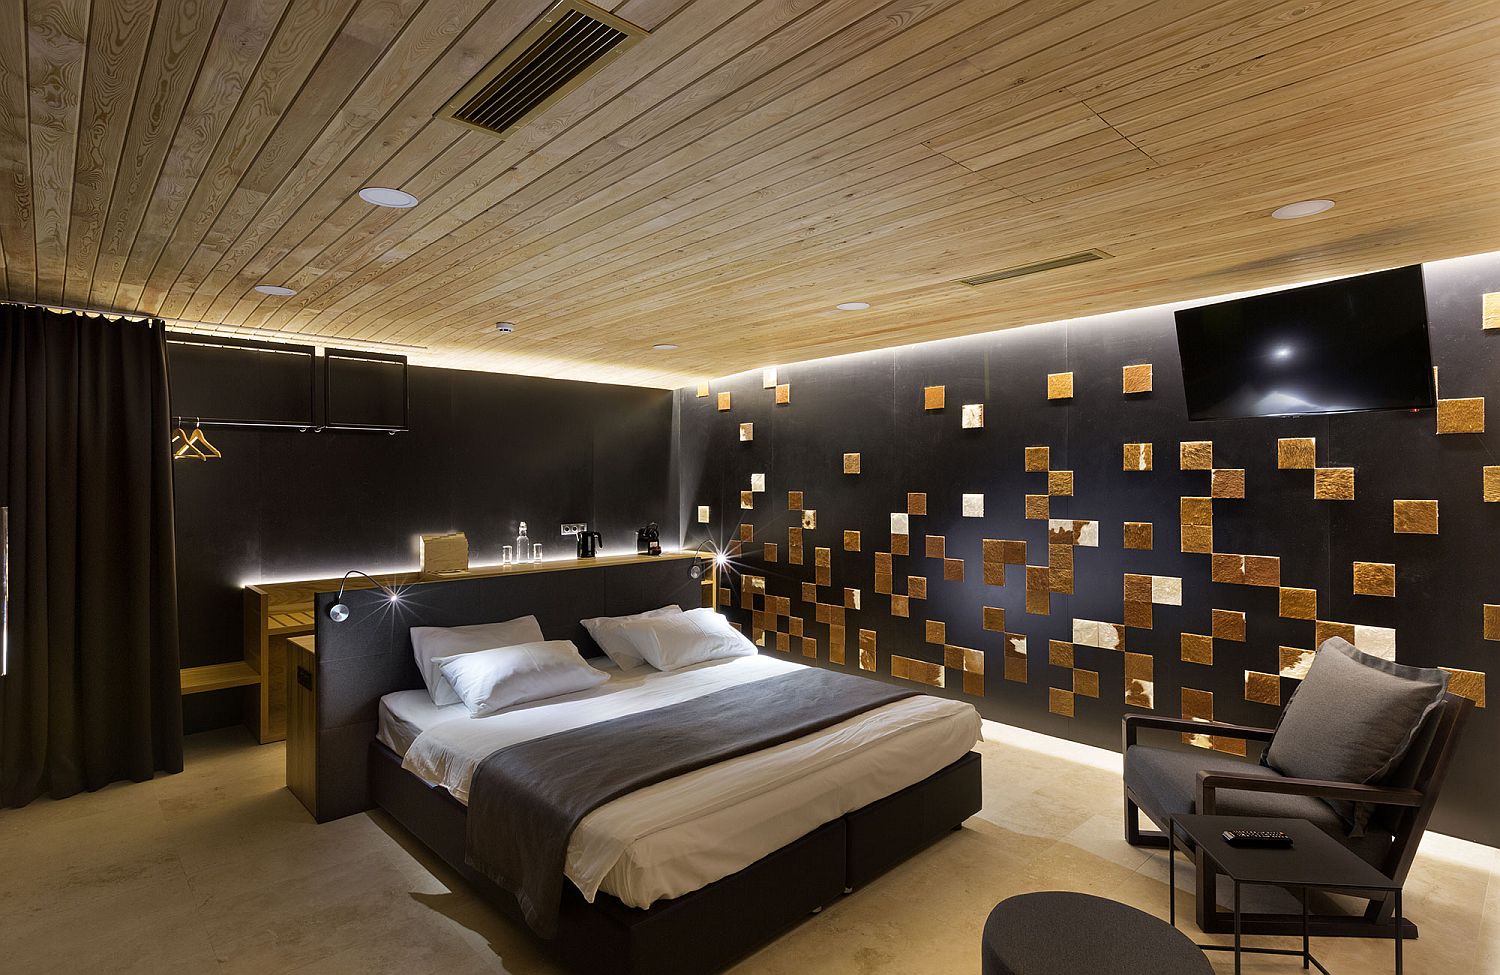 Fabulous-use-of-3D-wall-additions-to-give-the-bedroom-a-unique-appeal